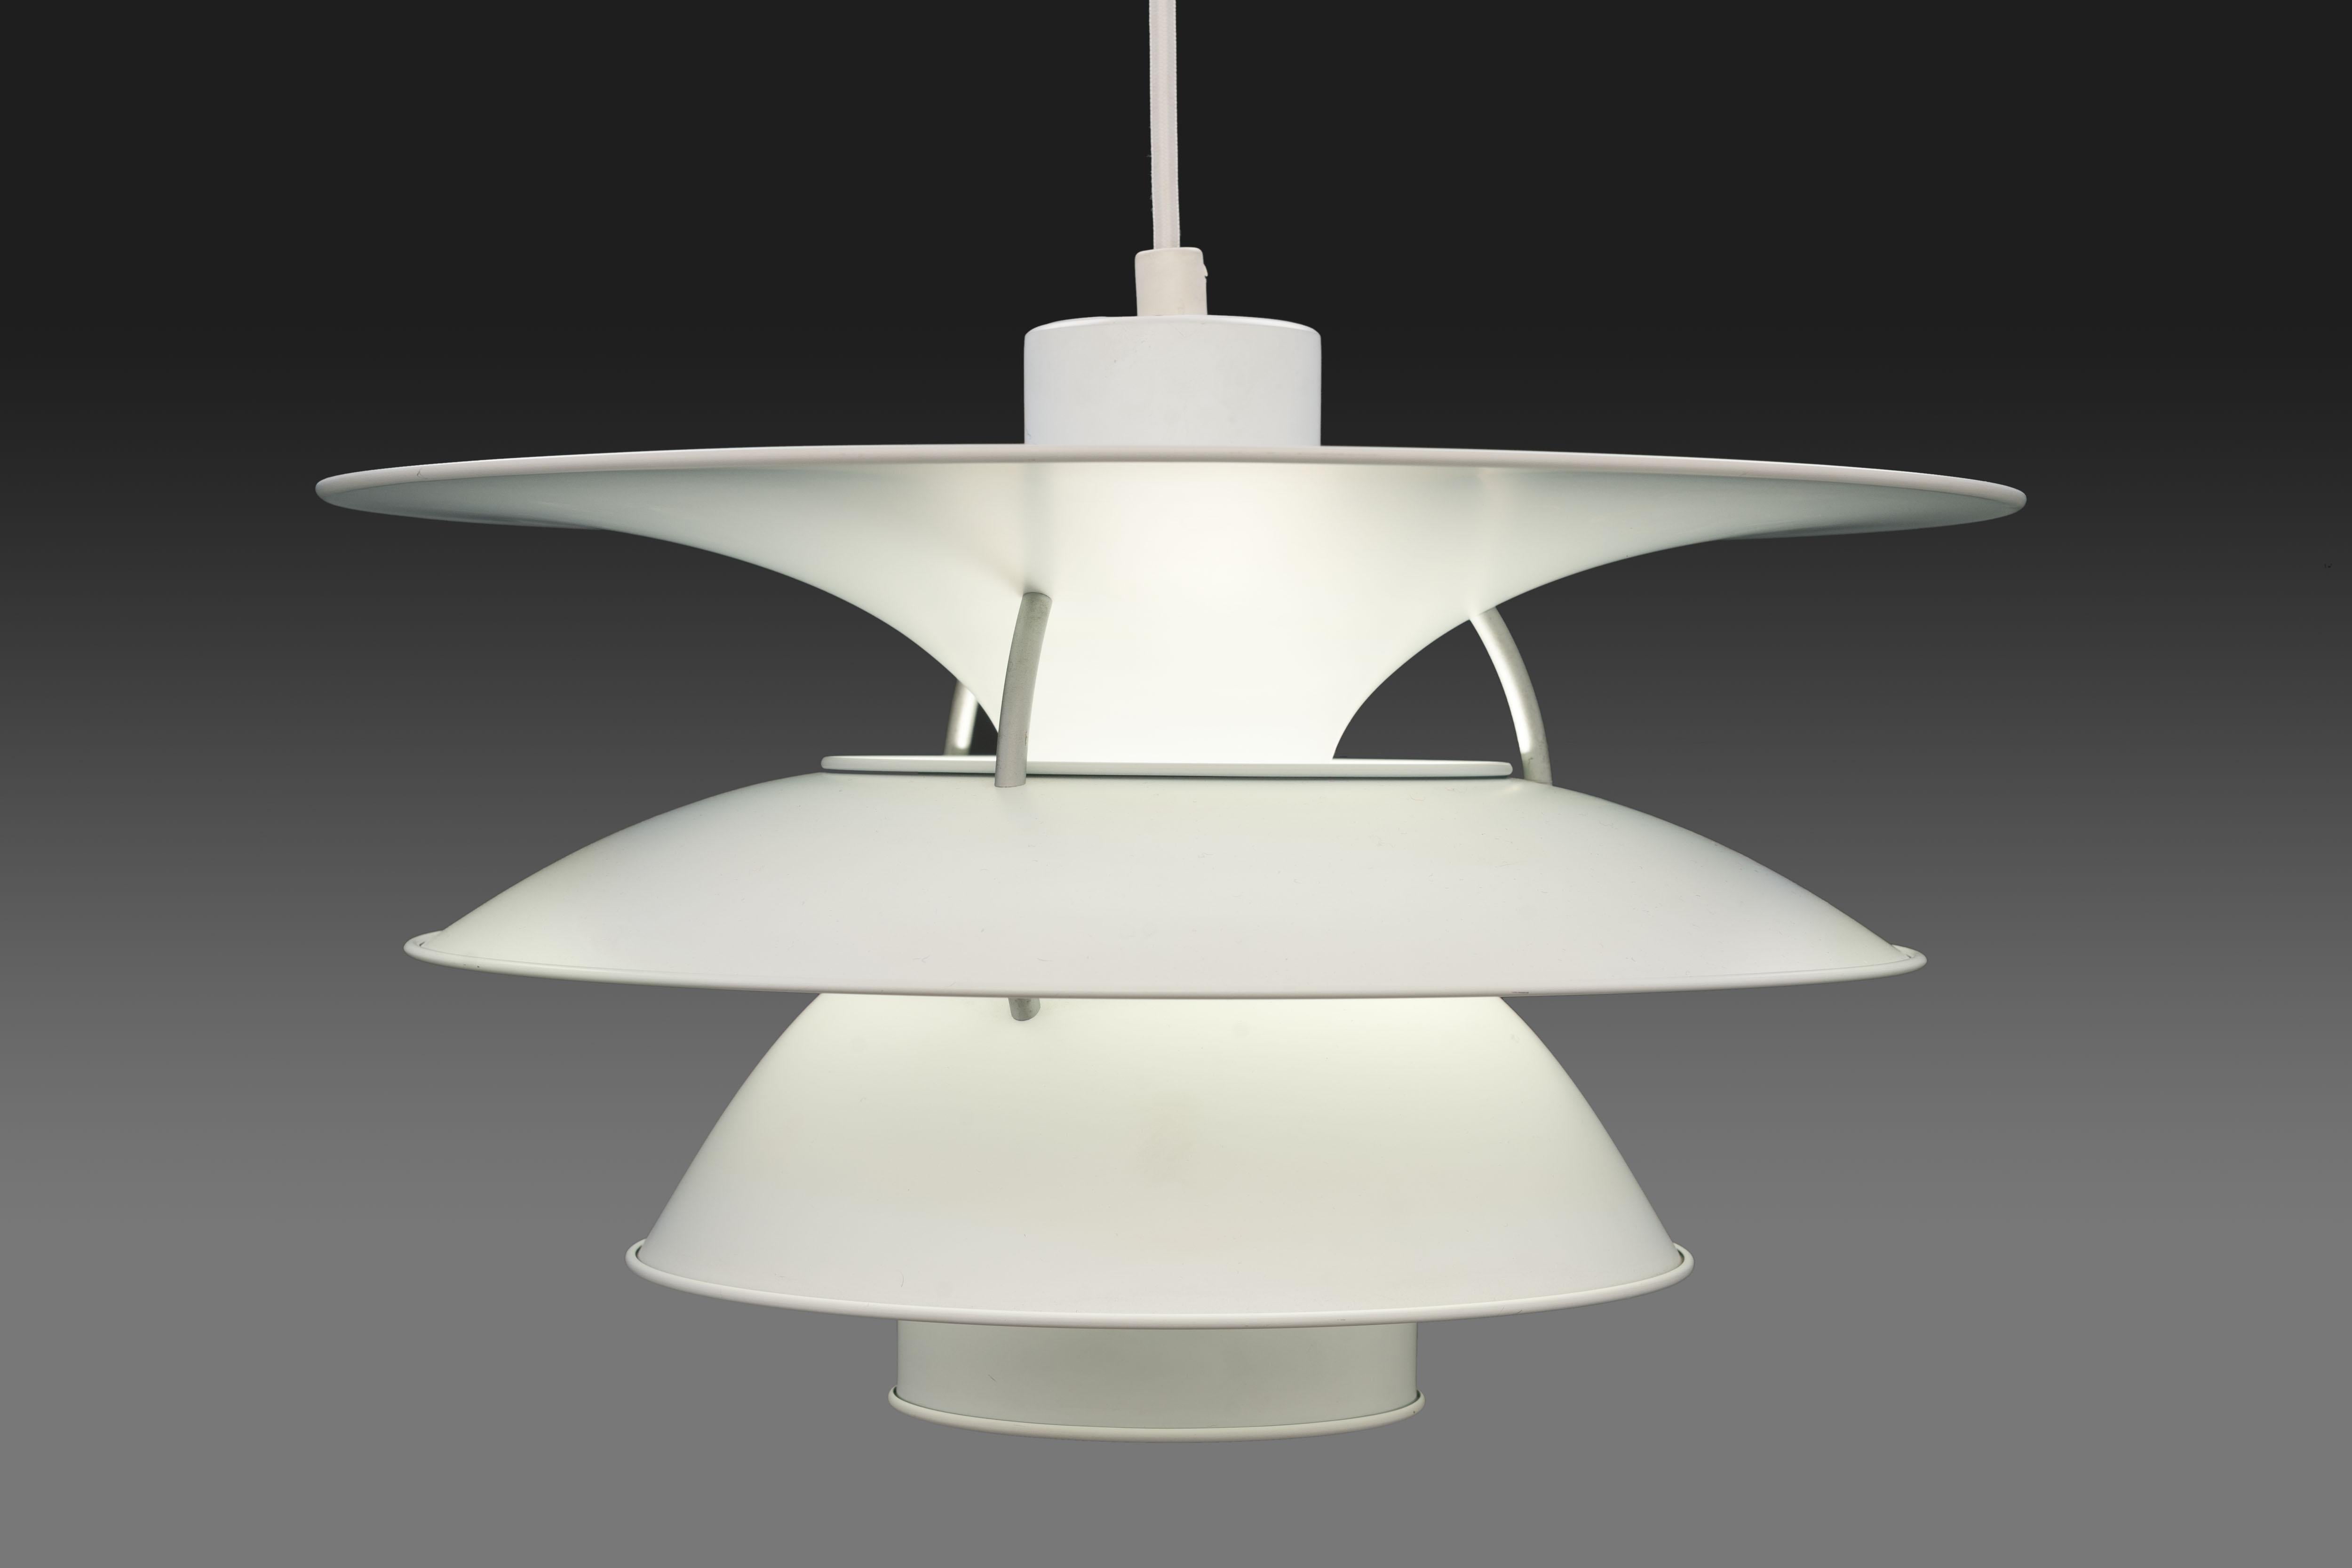 Beautiful large 'Charlottenborg' pendant designed in 1979 by Sophus Frandsen and Ebbe Christensen based on drawings from 1940 by Danish designer Poul Henningsen. The lamp was specially developed for the 'Charlottenborg' exhibition hall in Copenhagen